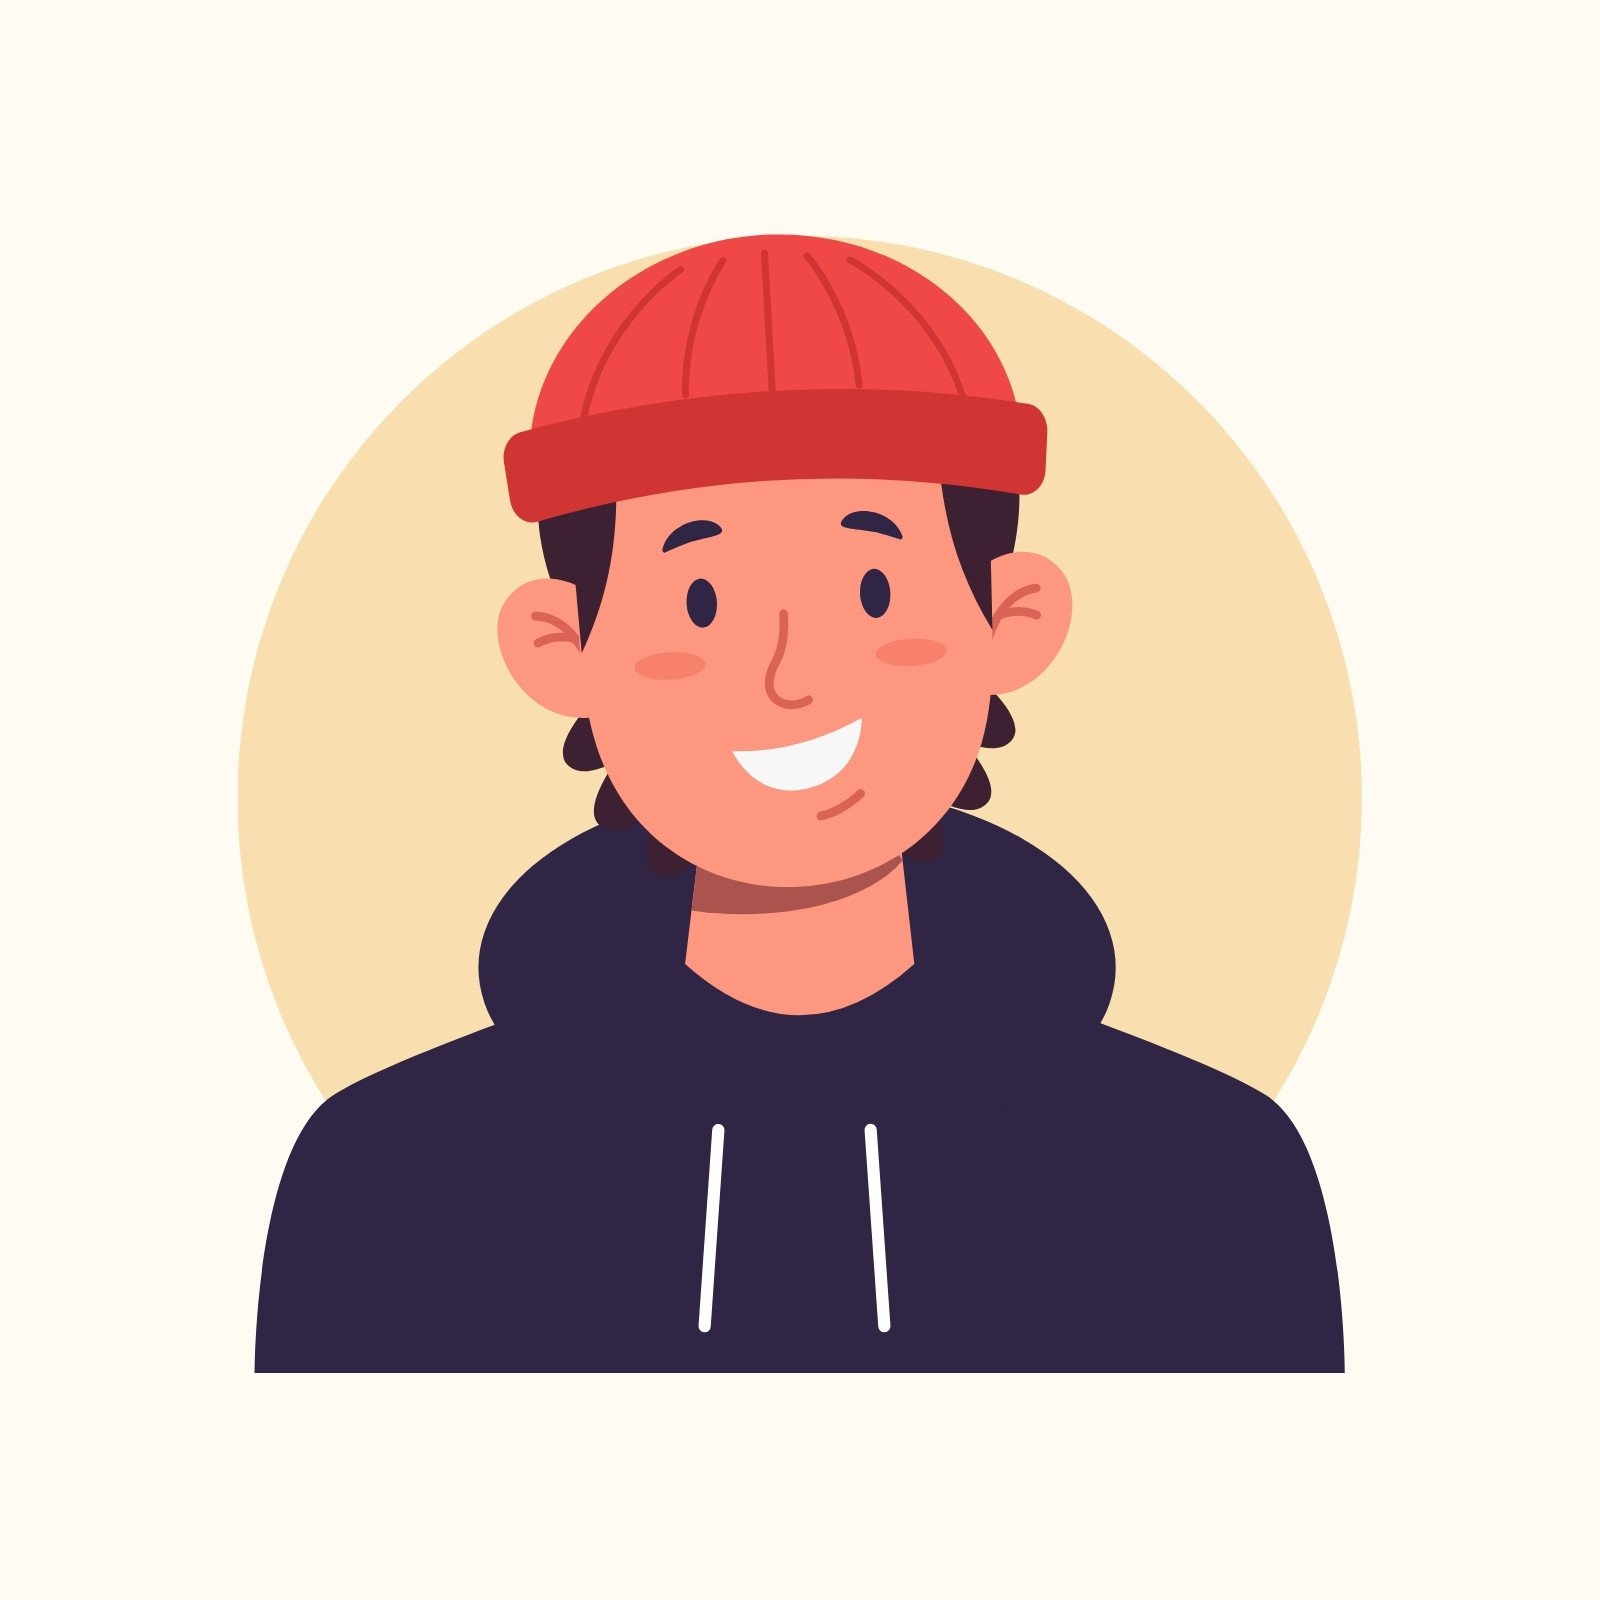 Colorful Illustrative Young Male Avatar